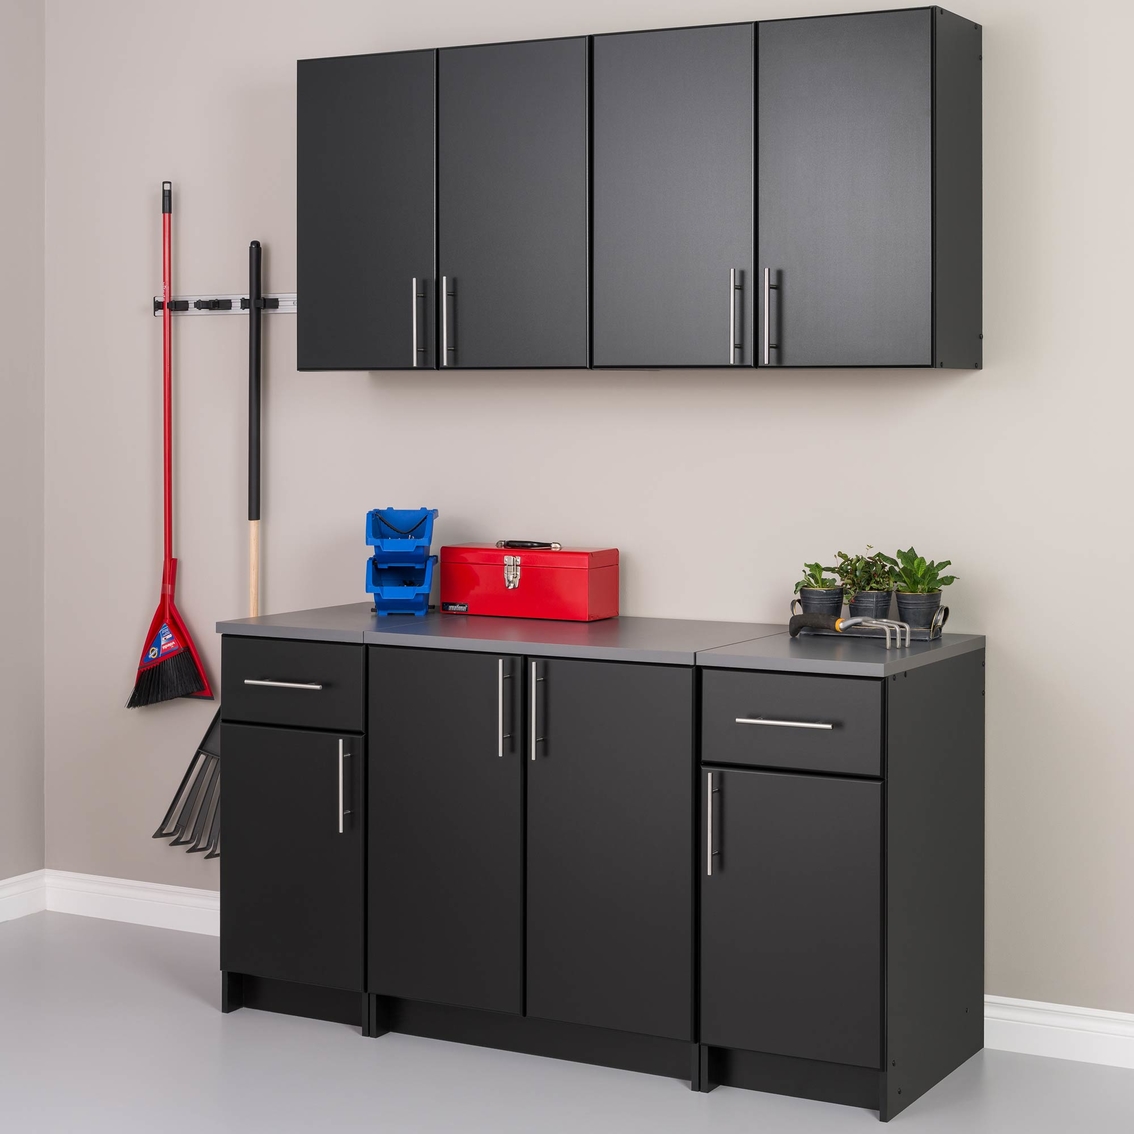 Elite 32 In. Wall Cabinet - Image 4 of 4